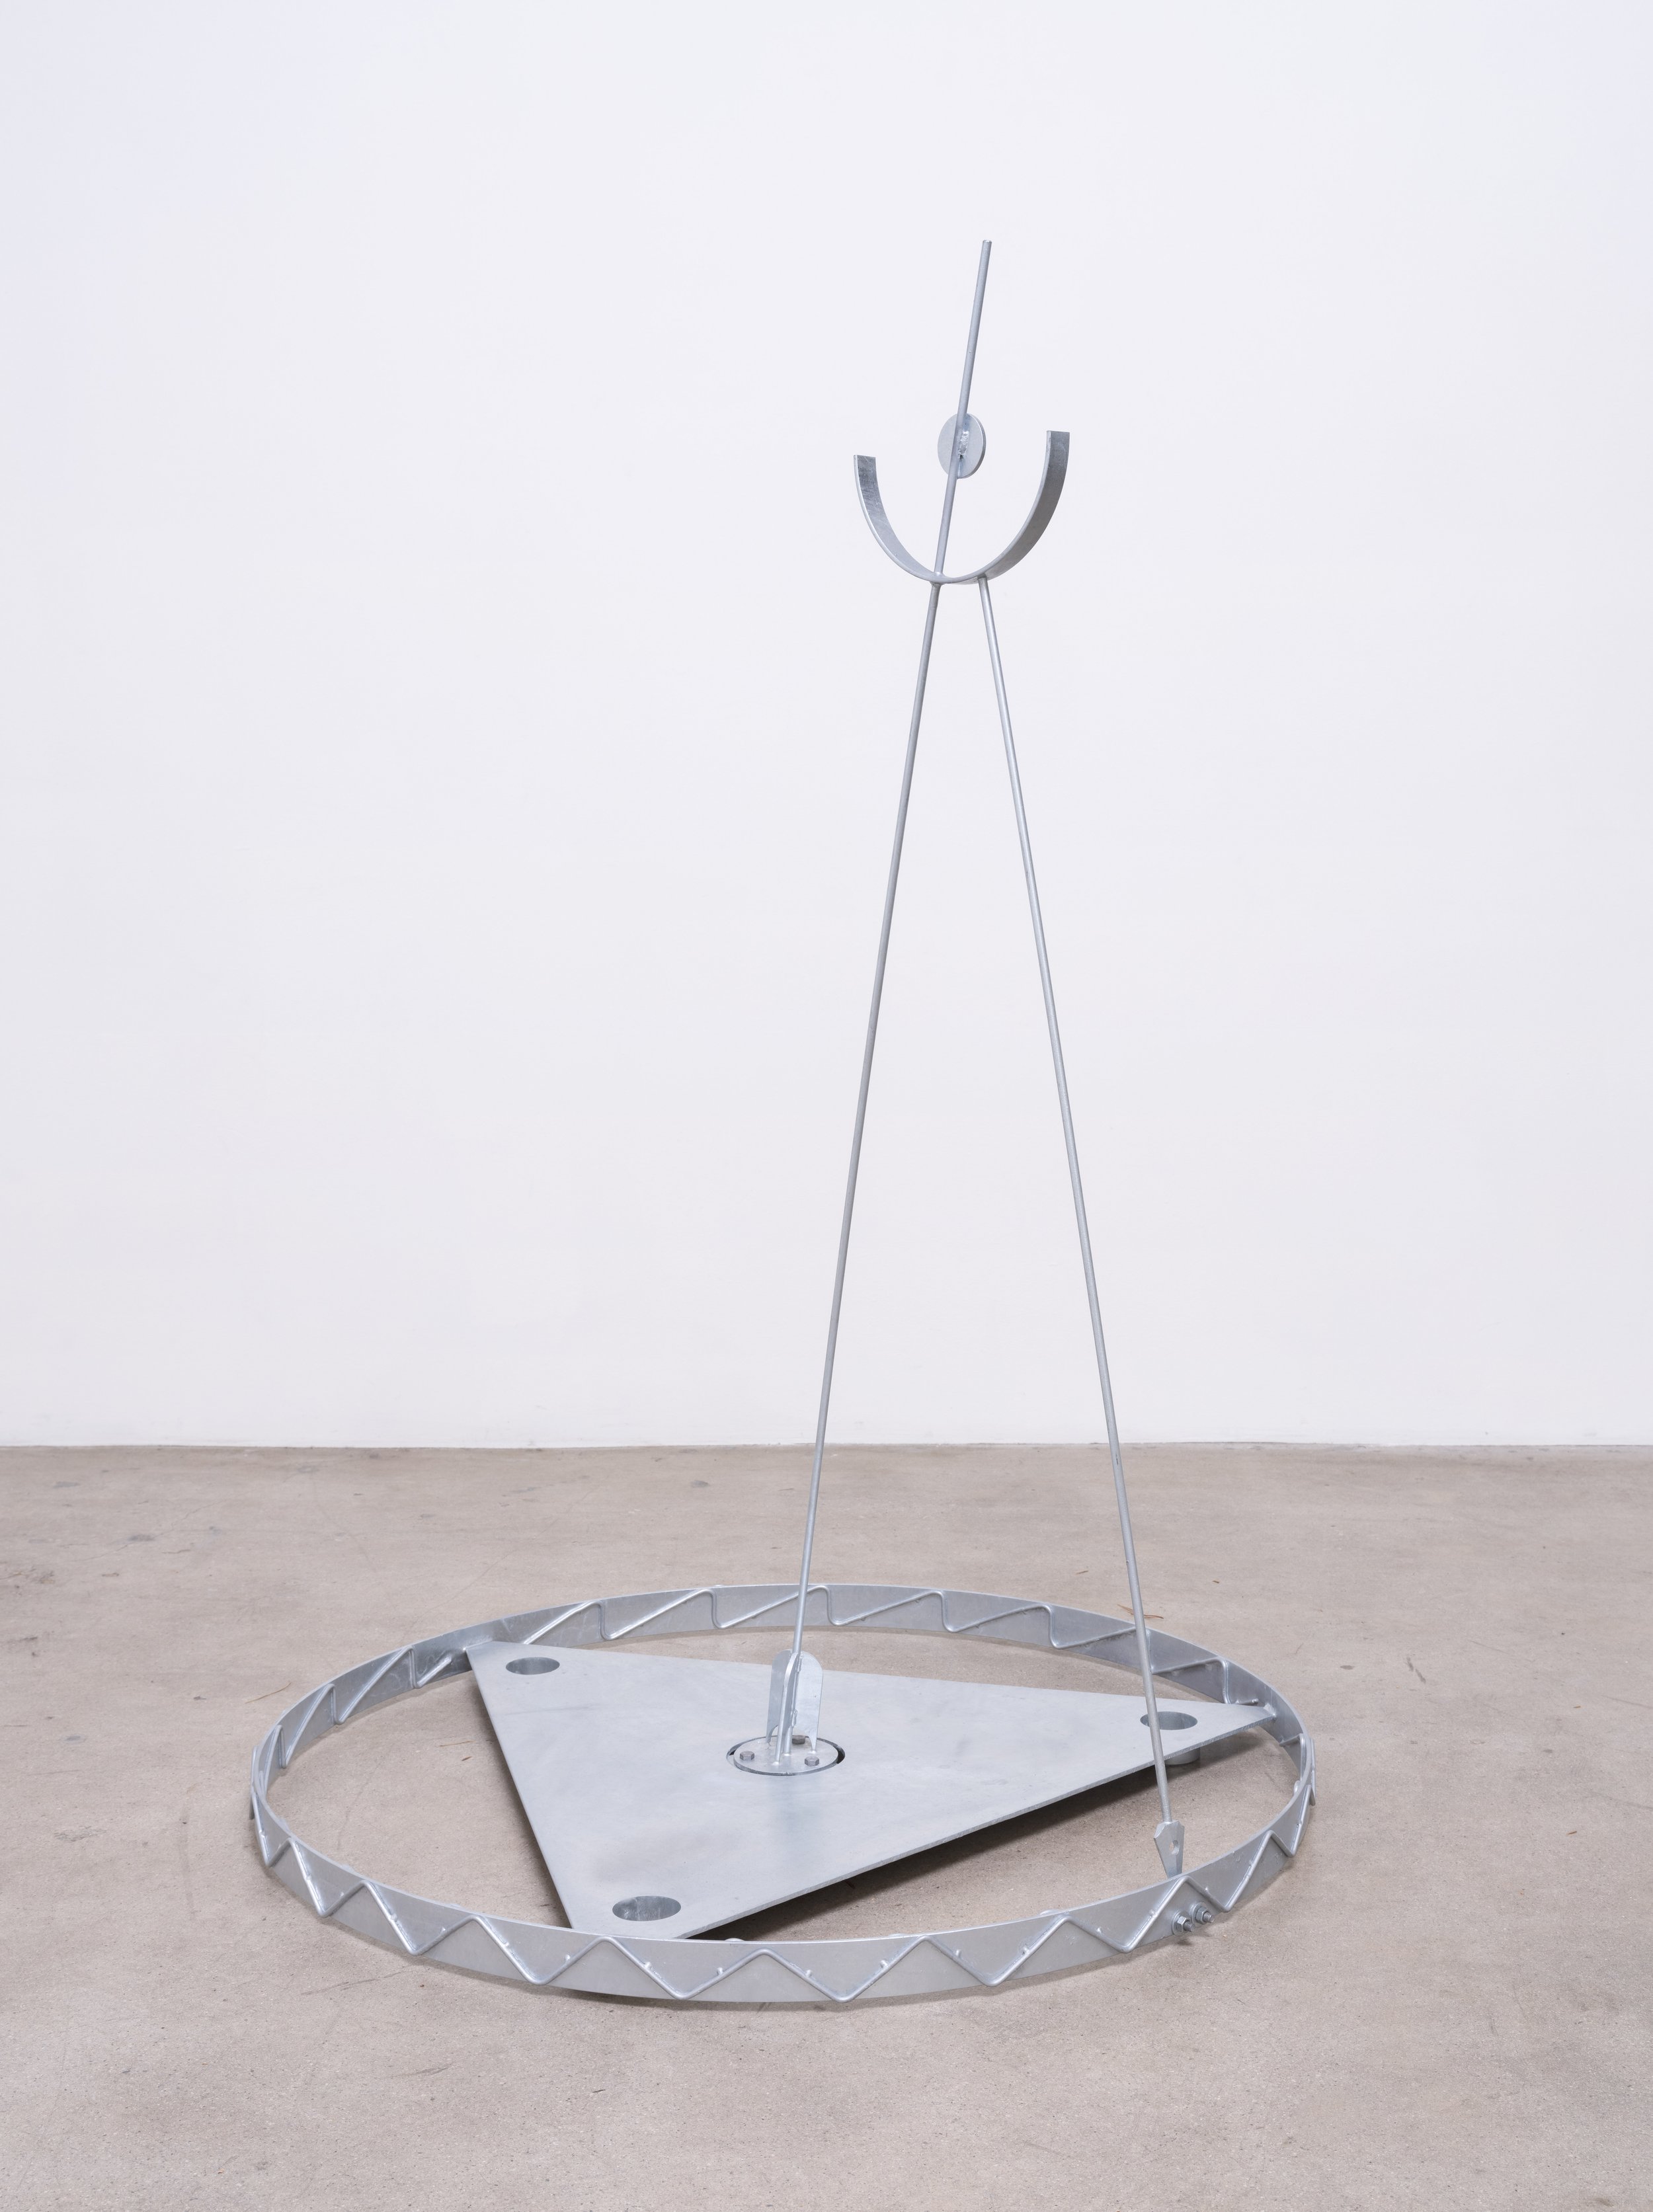   By Means of Which (Fire, Water) , 2023 Galvanized steel 57 x 40 1/2 x 40 1/2 inches 